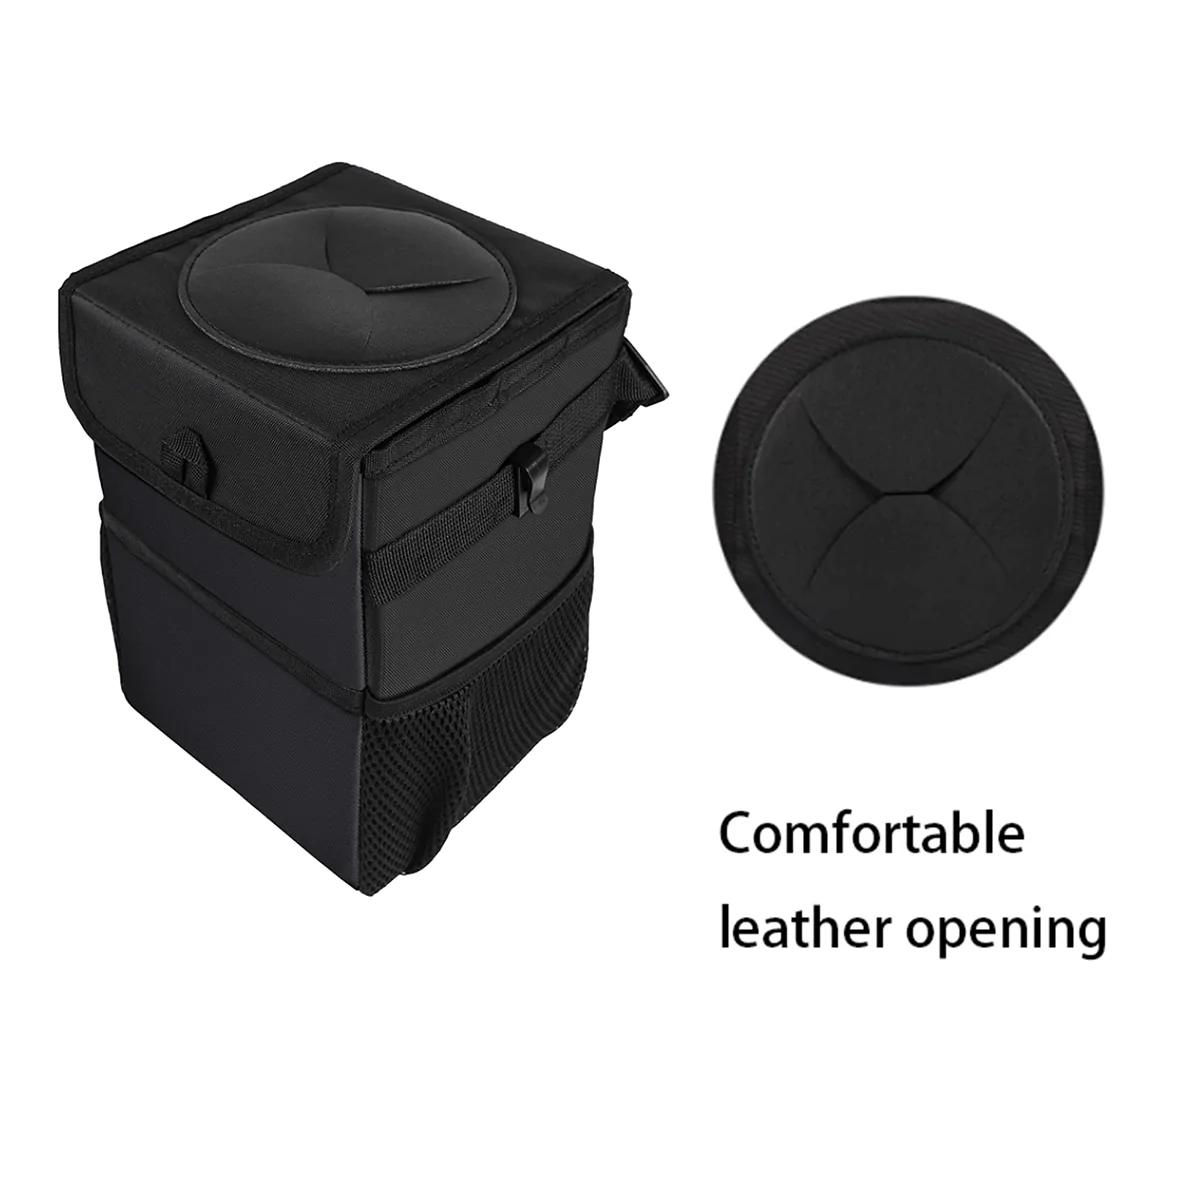 Waterproof Car Trash Can with Lid and Storage Pockets, Custom fit for 100% Leak-Proof Car Organizer, Waterproof Car Garbage Can, Multipurpose Trash Bin for Car